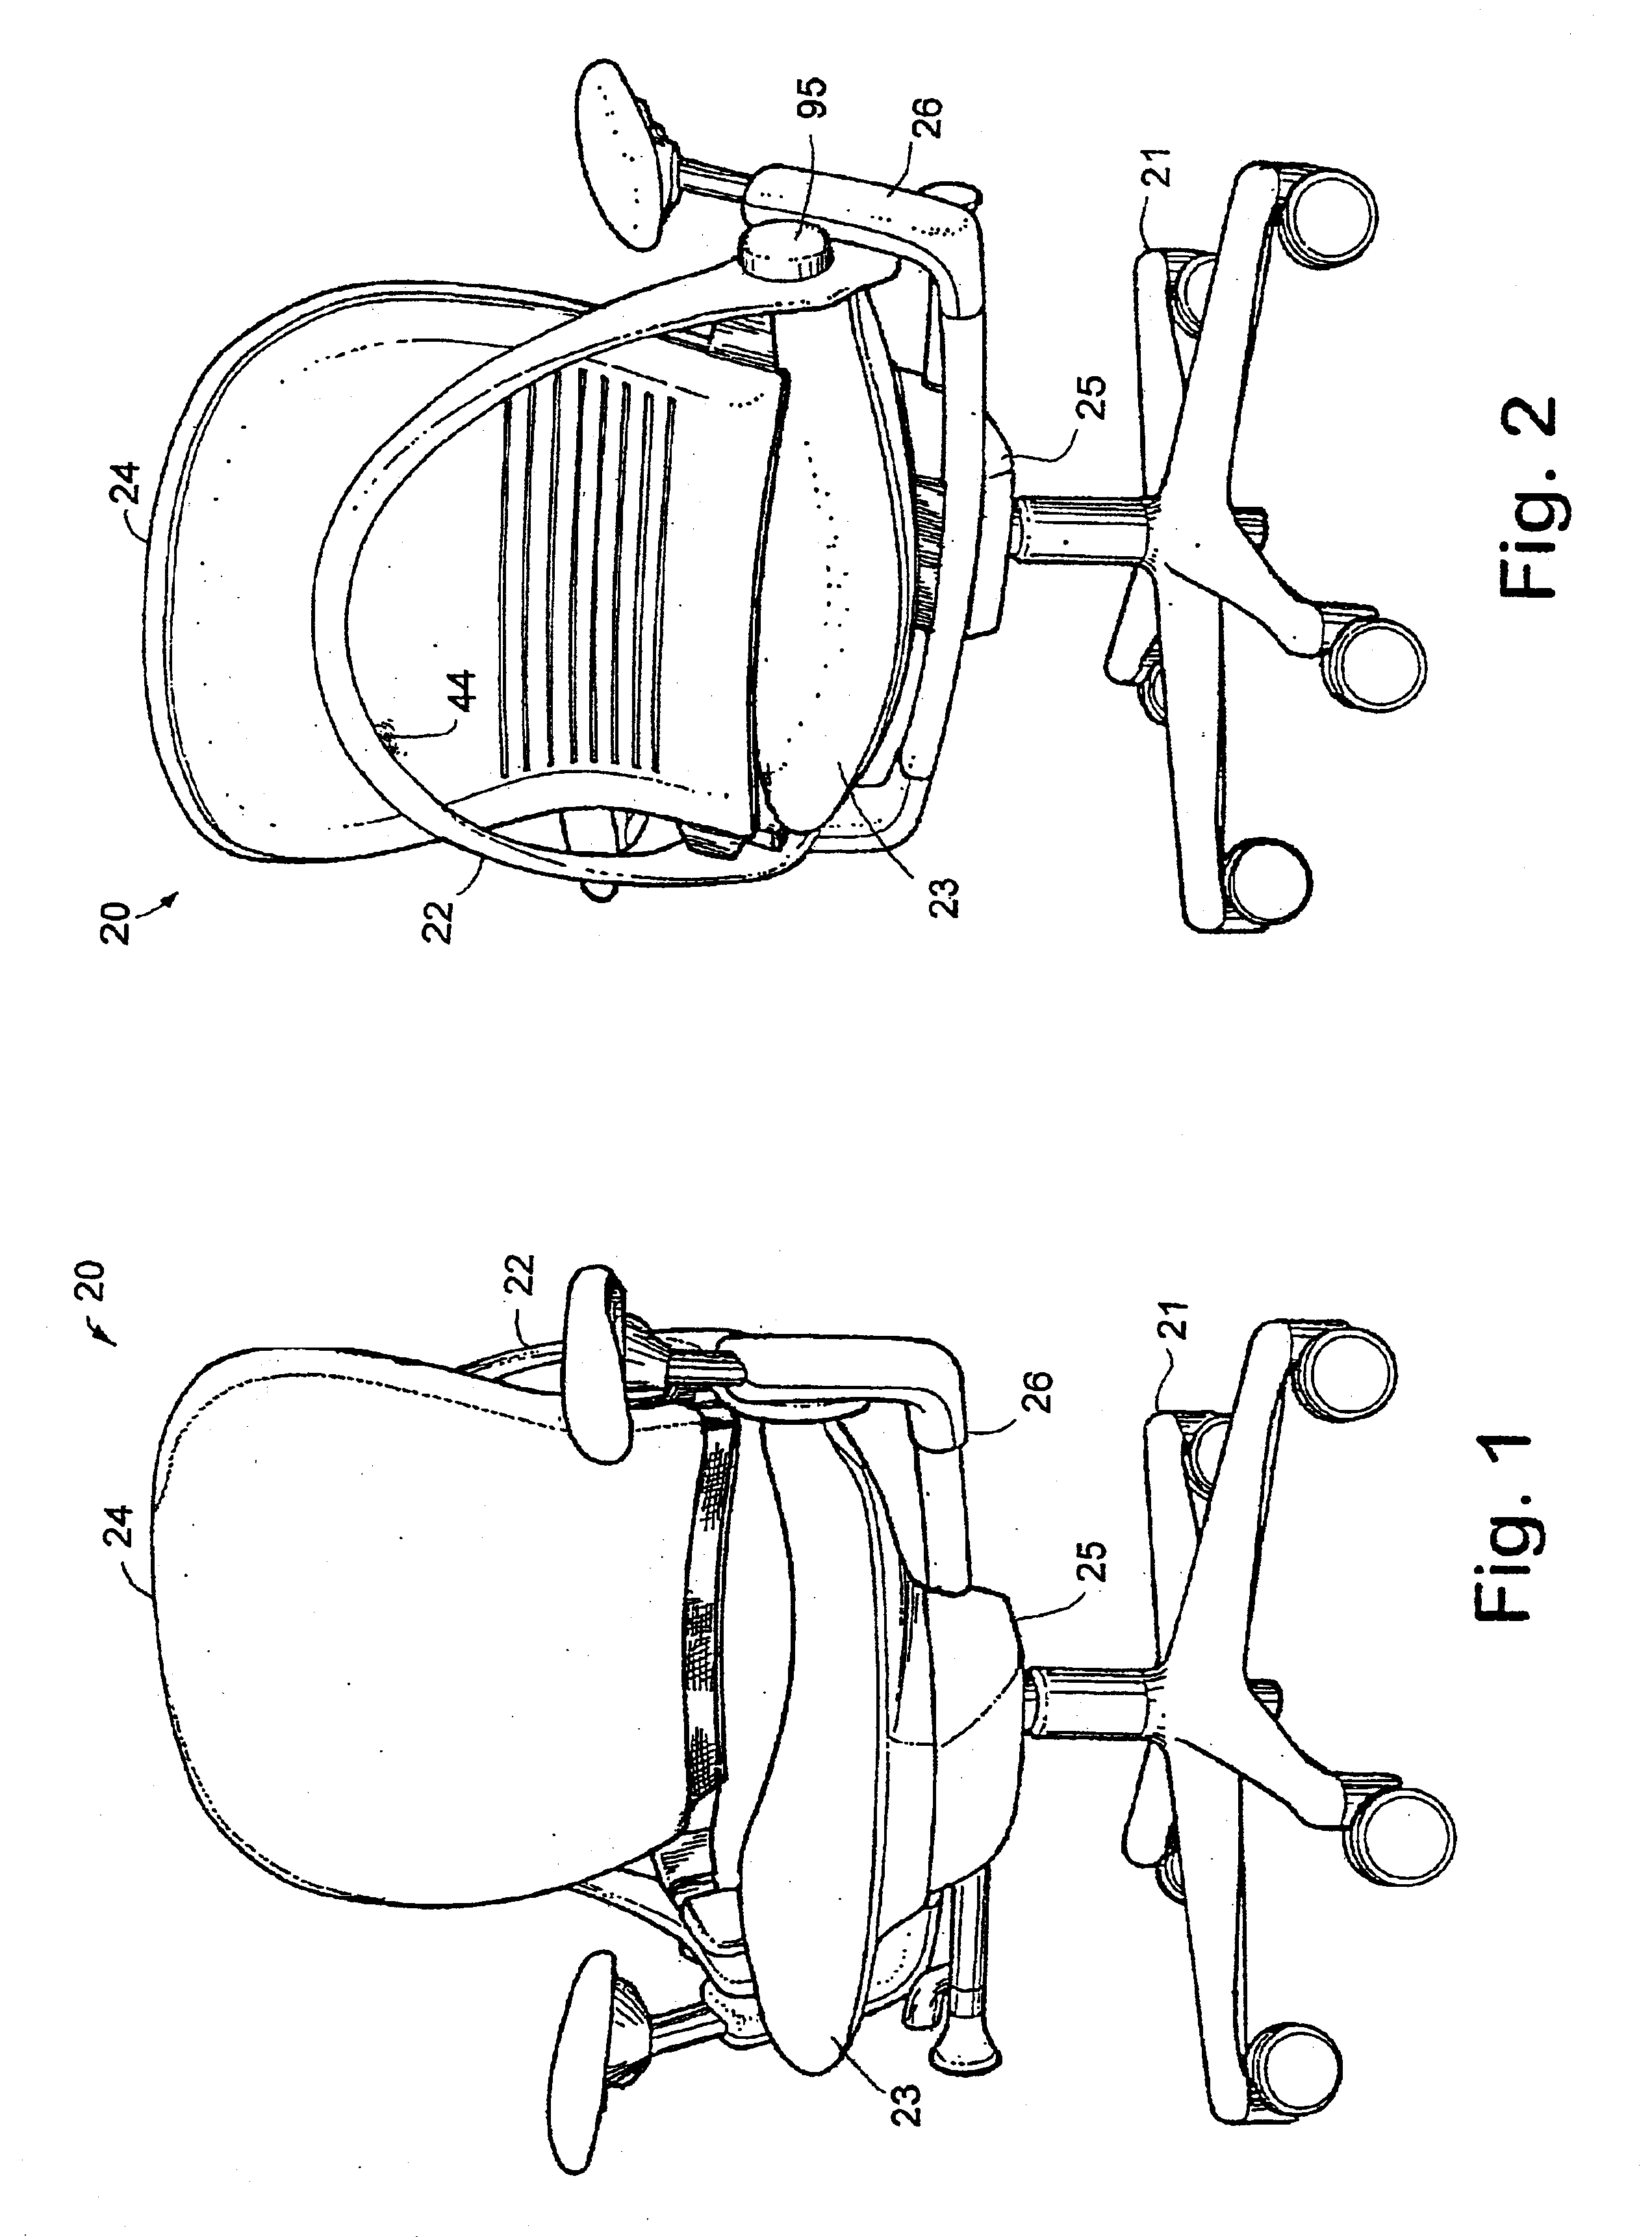 Method of manufacturing cushion construction for seating unit